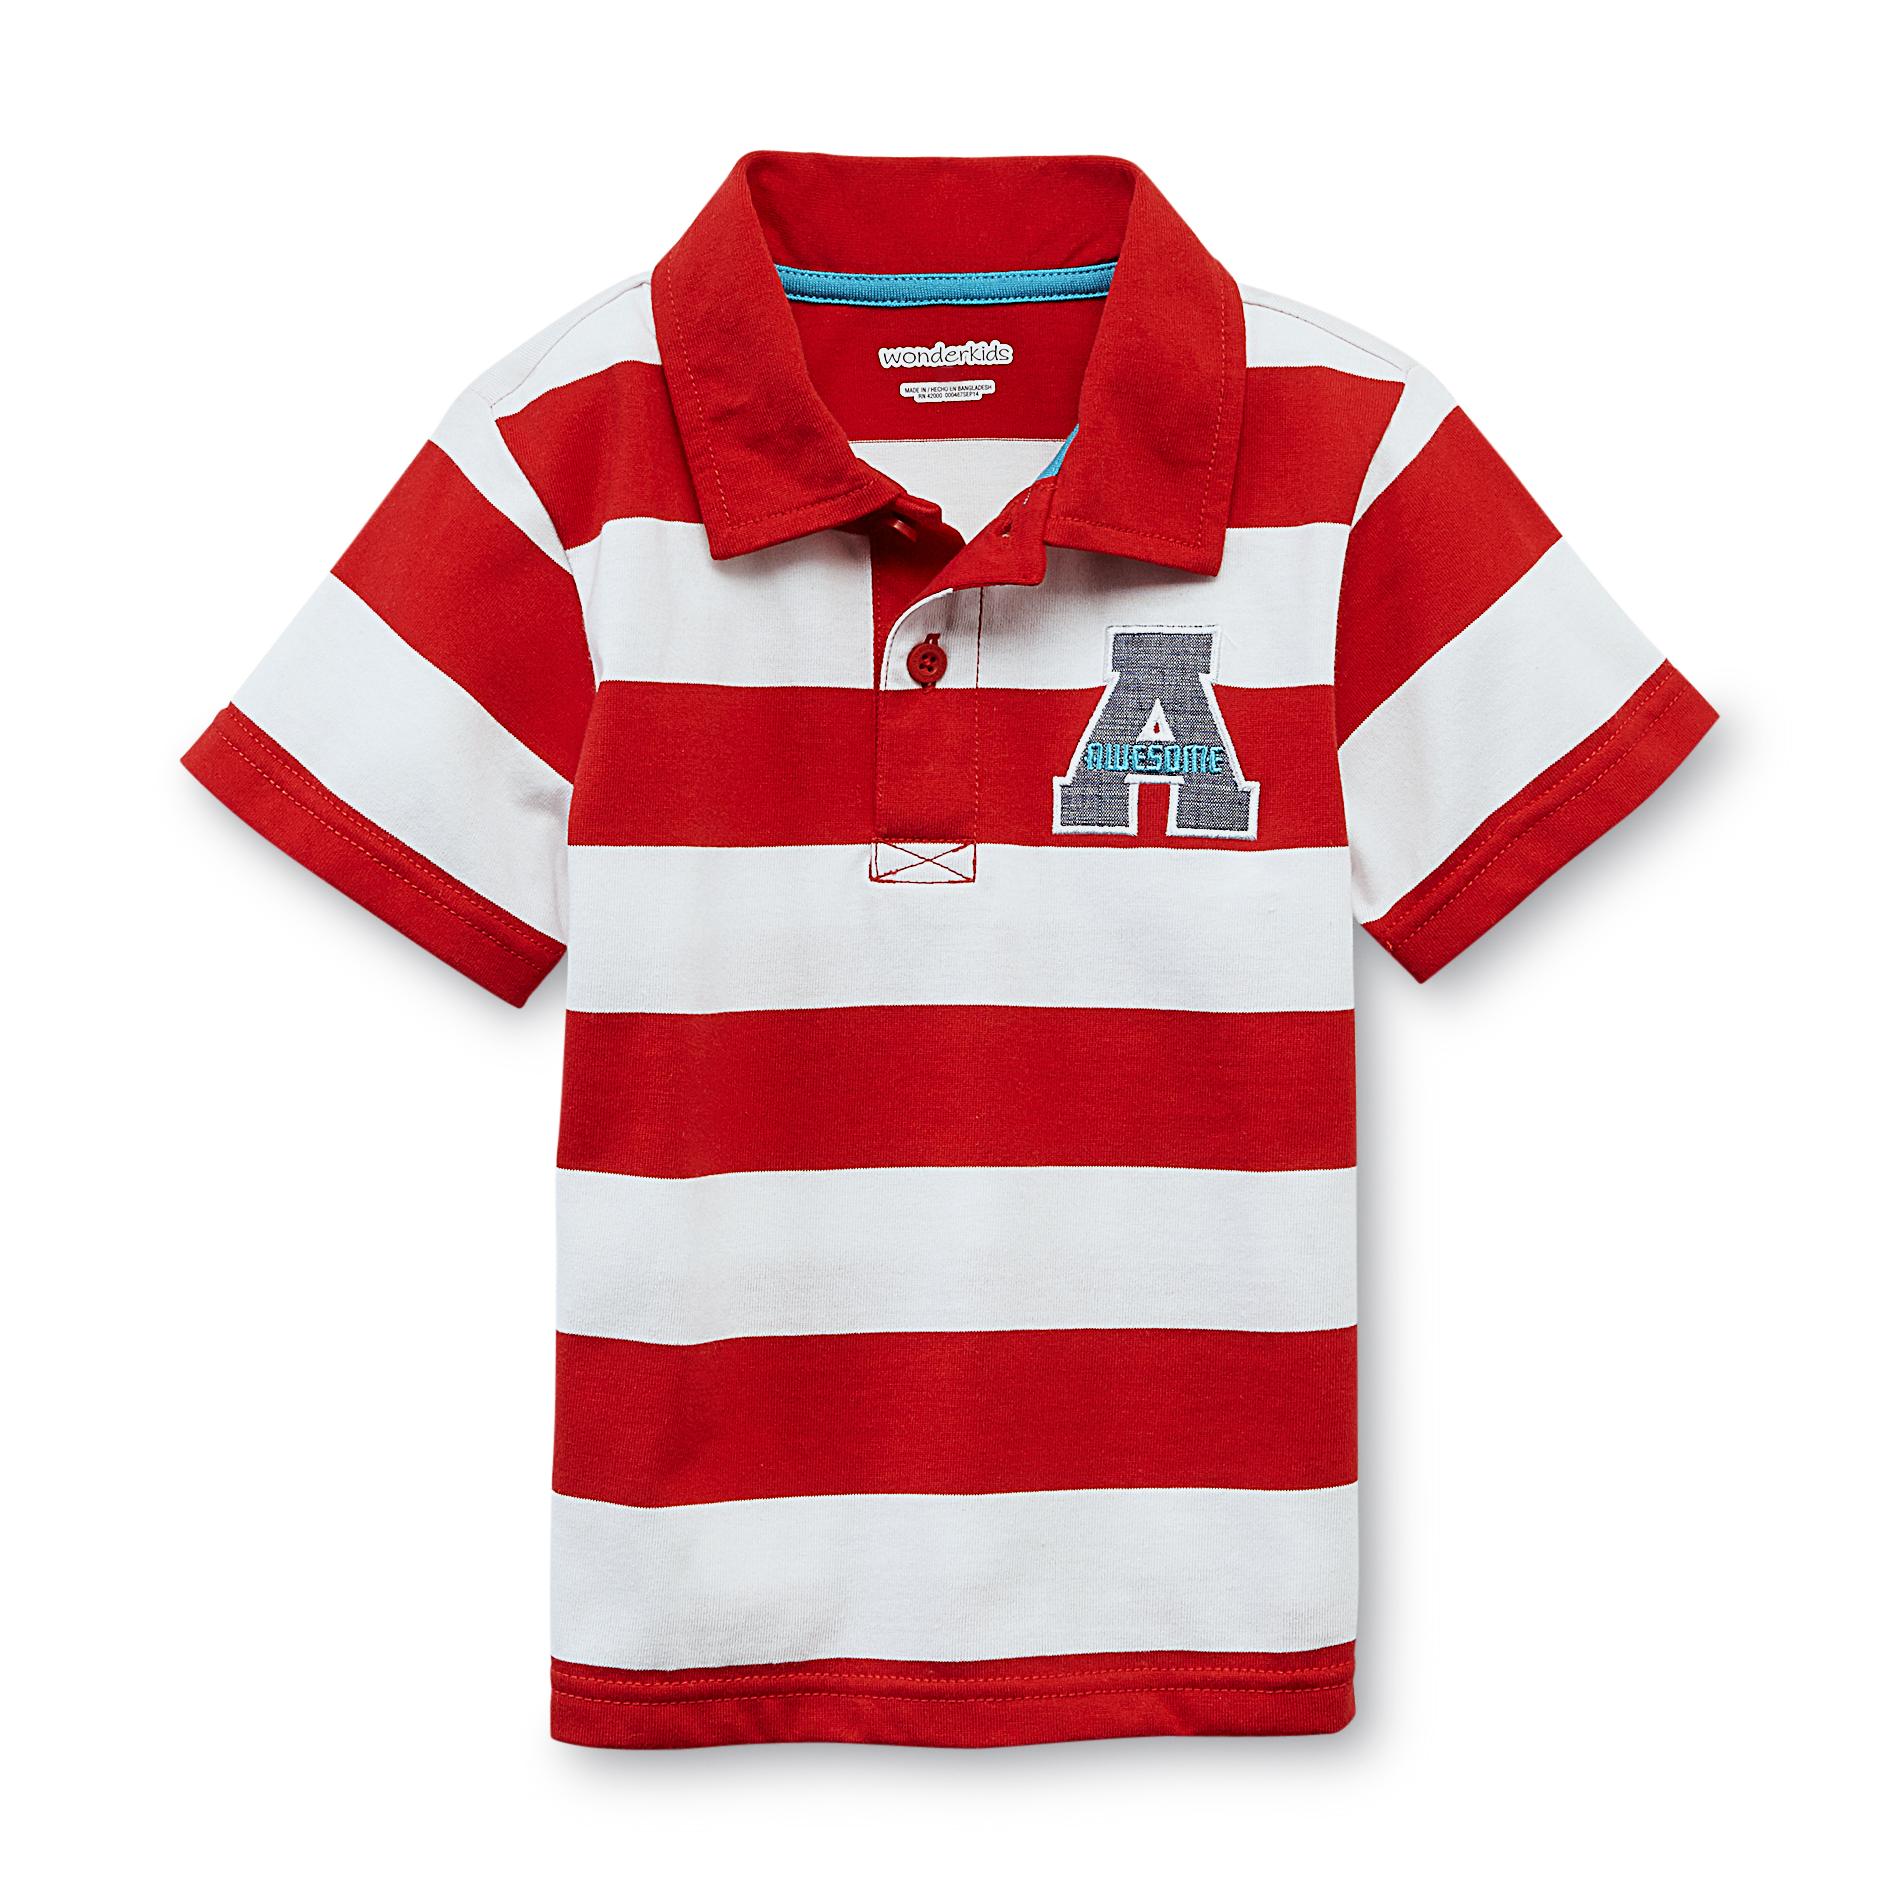 WonderKids Infant & Toddler Boy's Striped Polo Shirt - Awesome